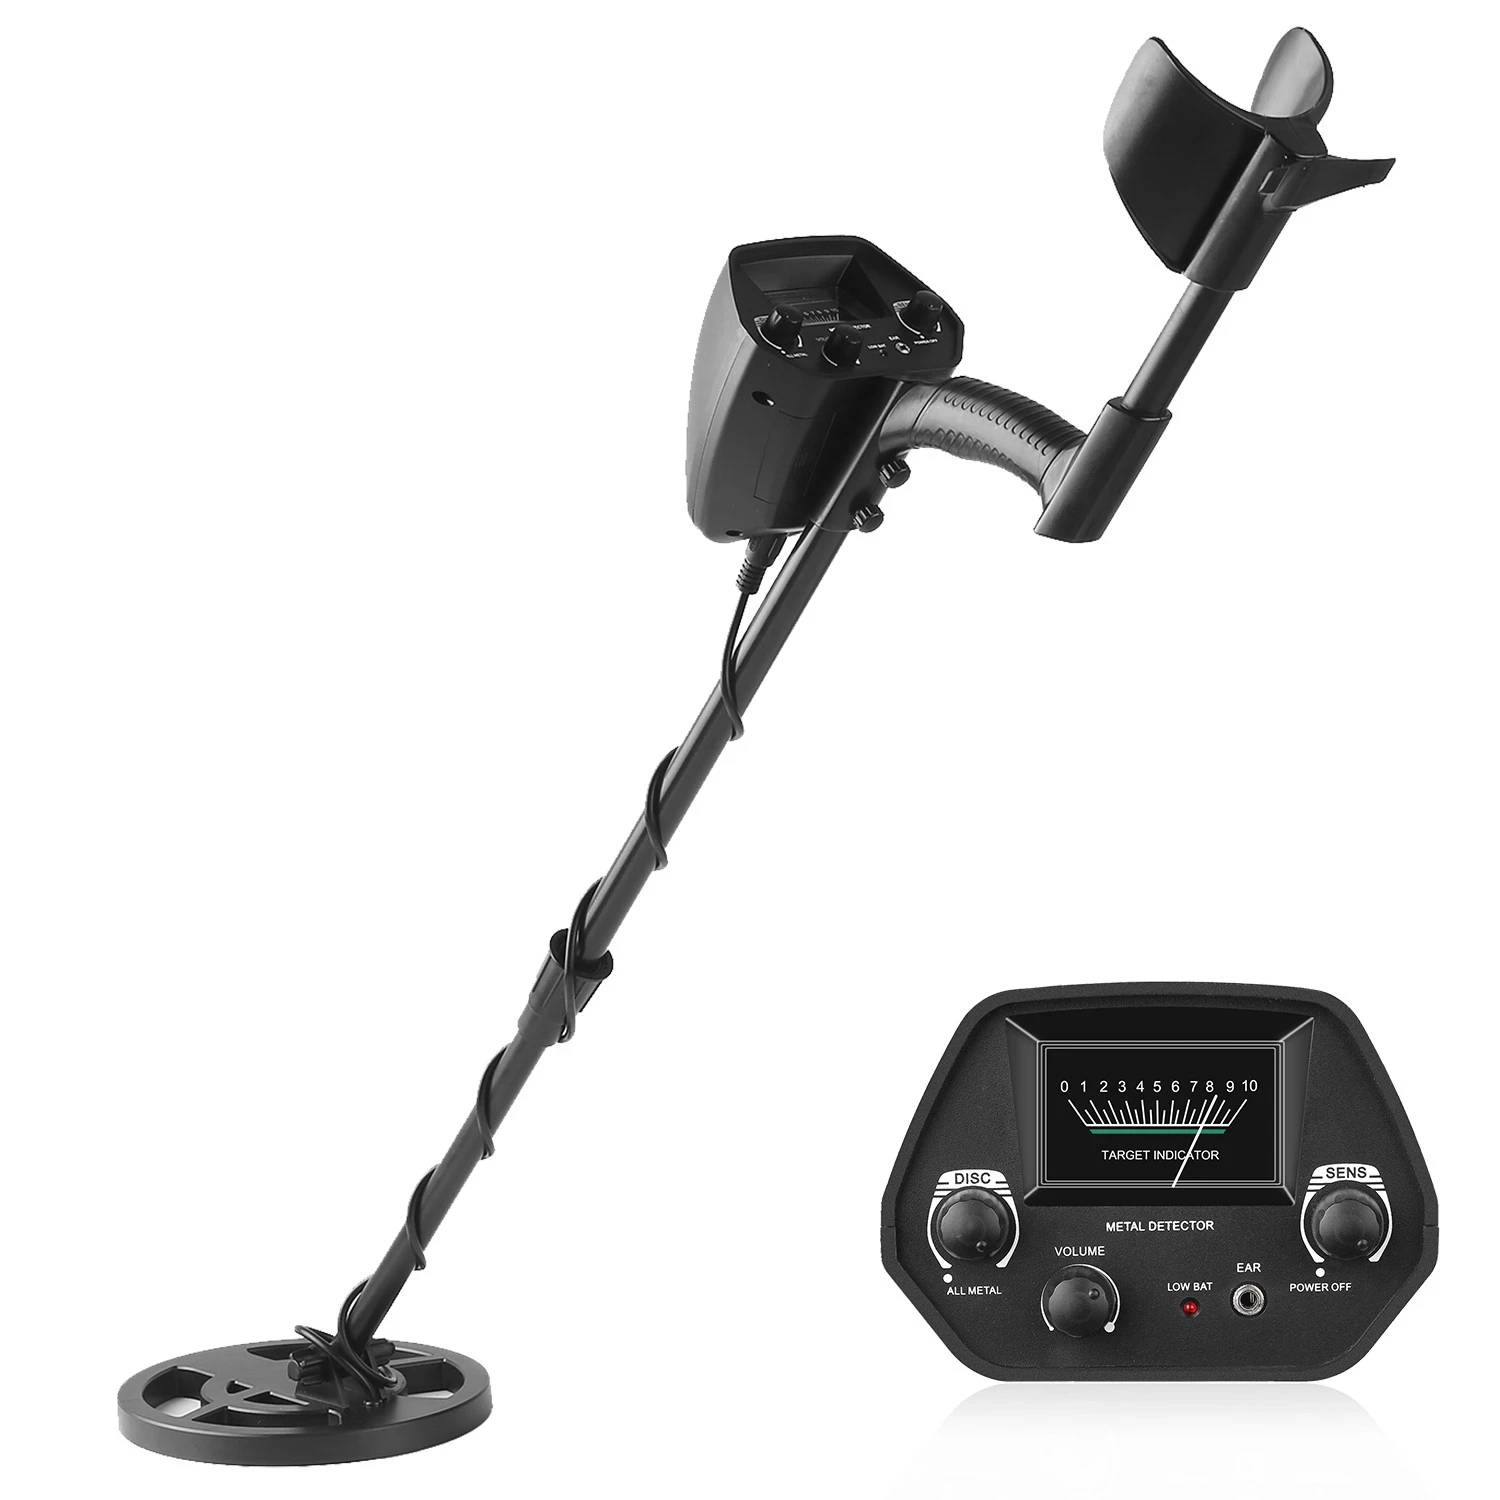 MD 4090 MD 4080 MD 5090 GTX5030 Metal Detector Underground Gold Detector High Accuracy Waterproof Search